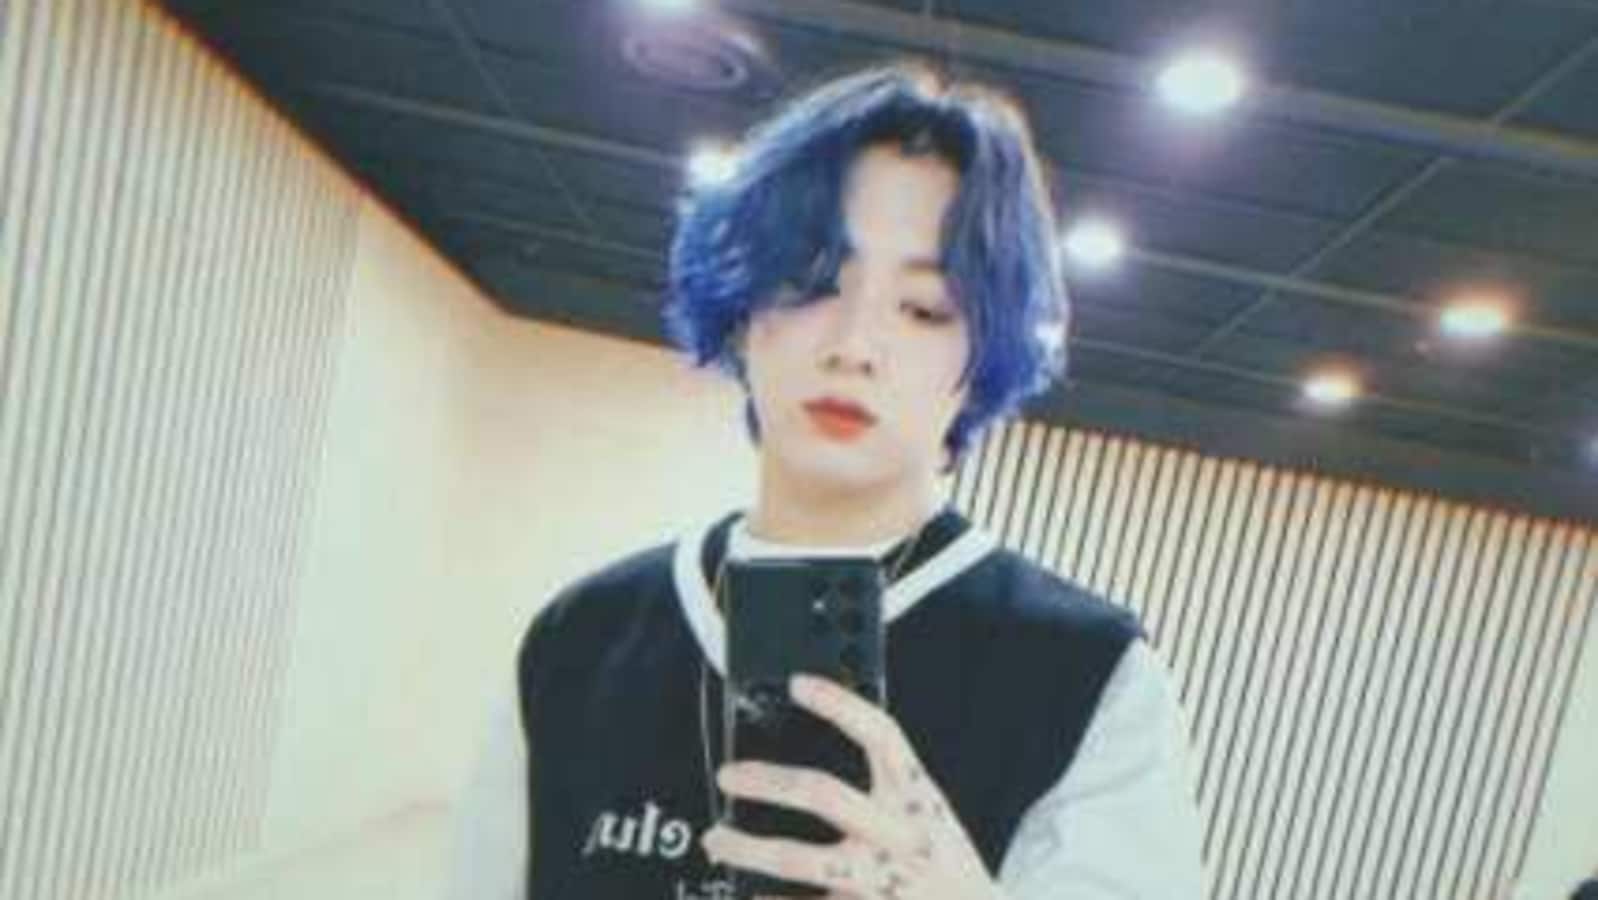 BTS Jungkook's Blue Hair Moments: From "No More Dream" to "Butter" - wide 4